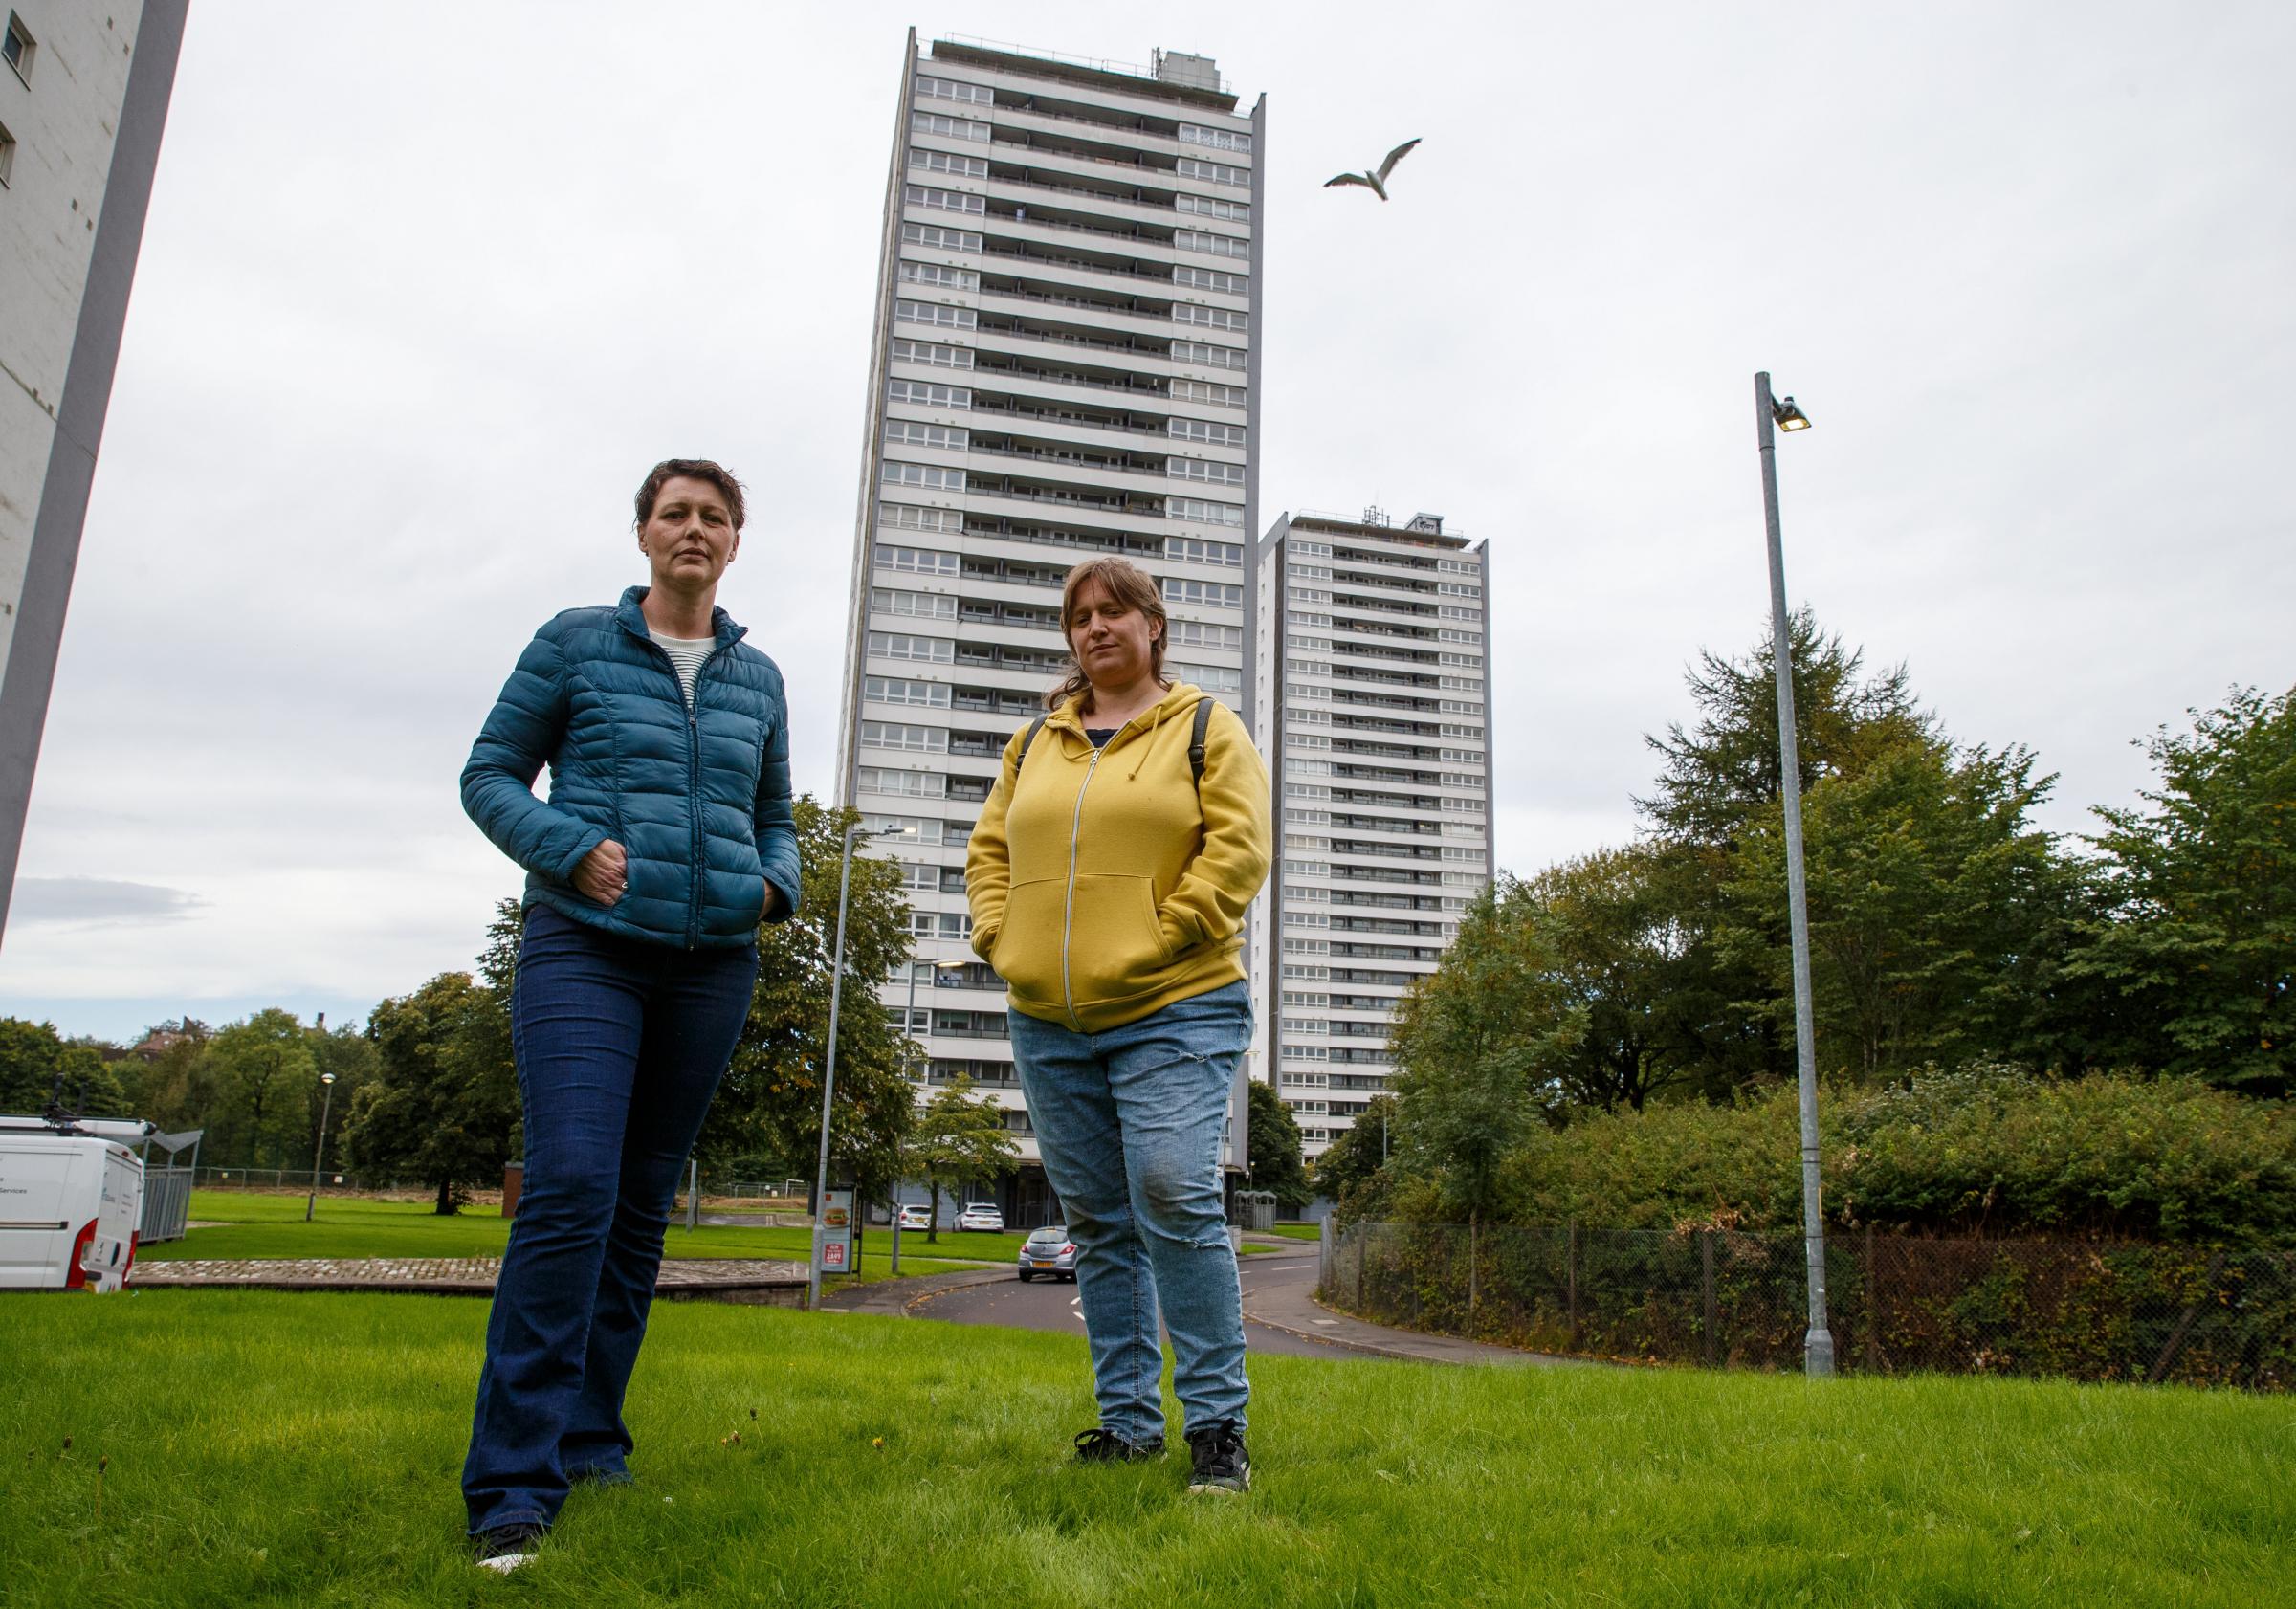  Caz Rae, left and Ellenor Hutson, at right, both with the Wyndford Residents Association. Four tower blocks in the Wyndford are earmarked for demolition. Photograph by Colin Mearns.